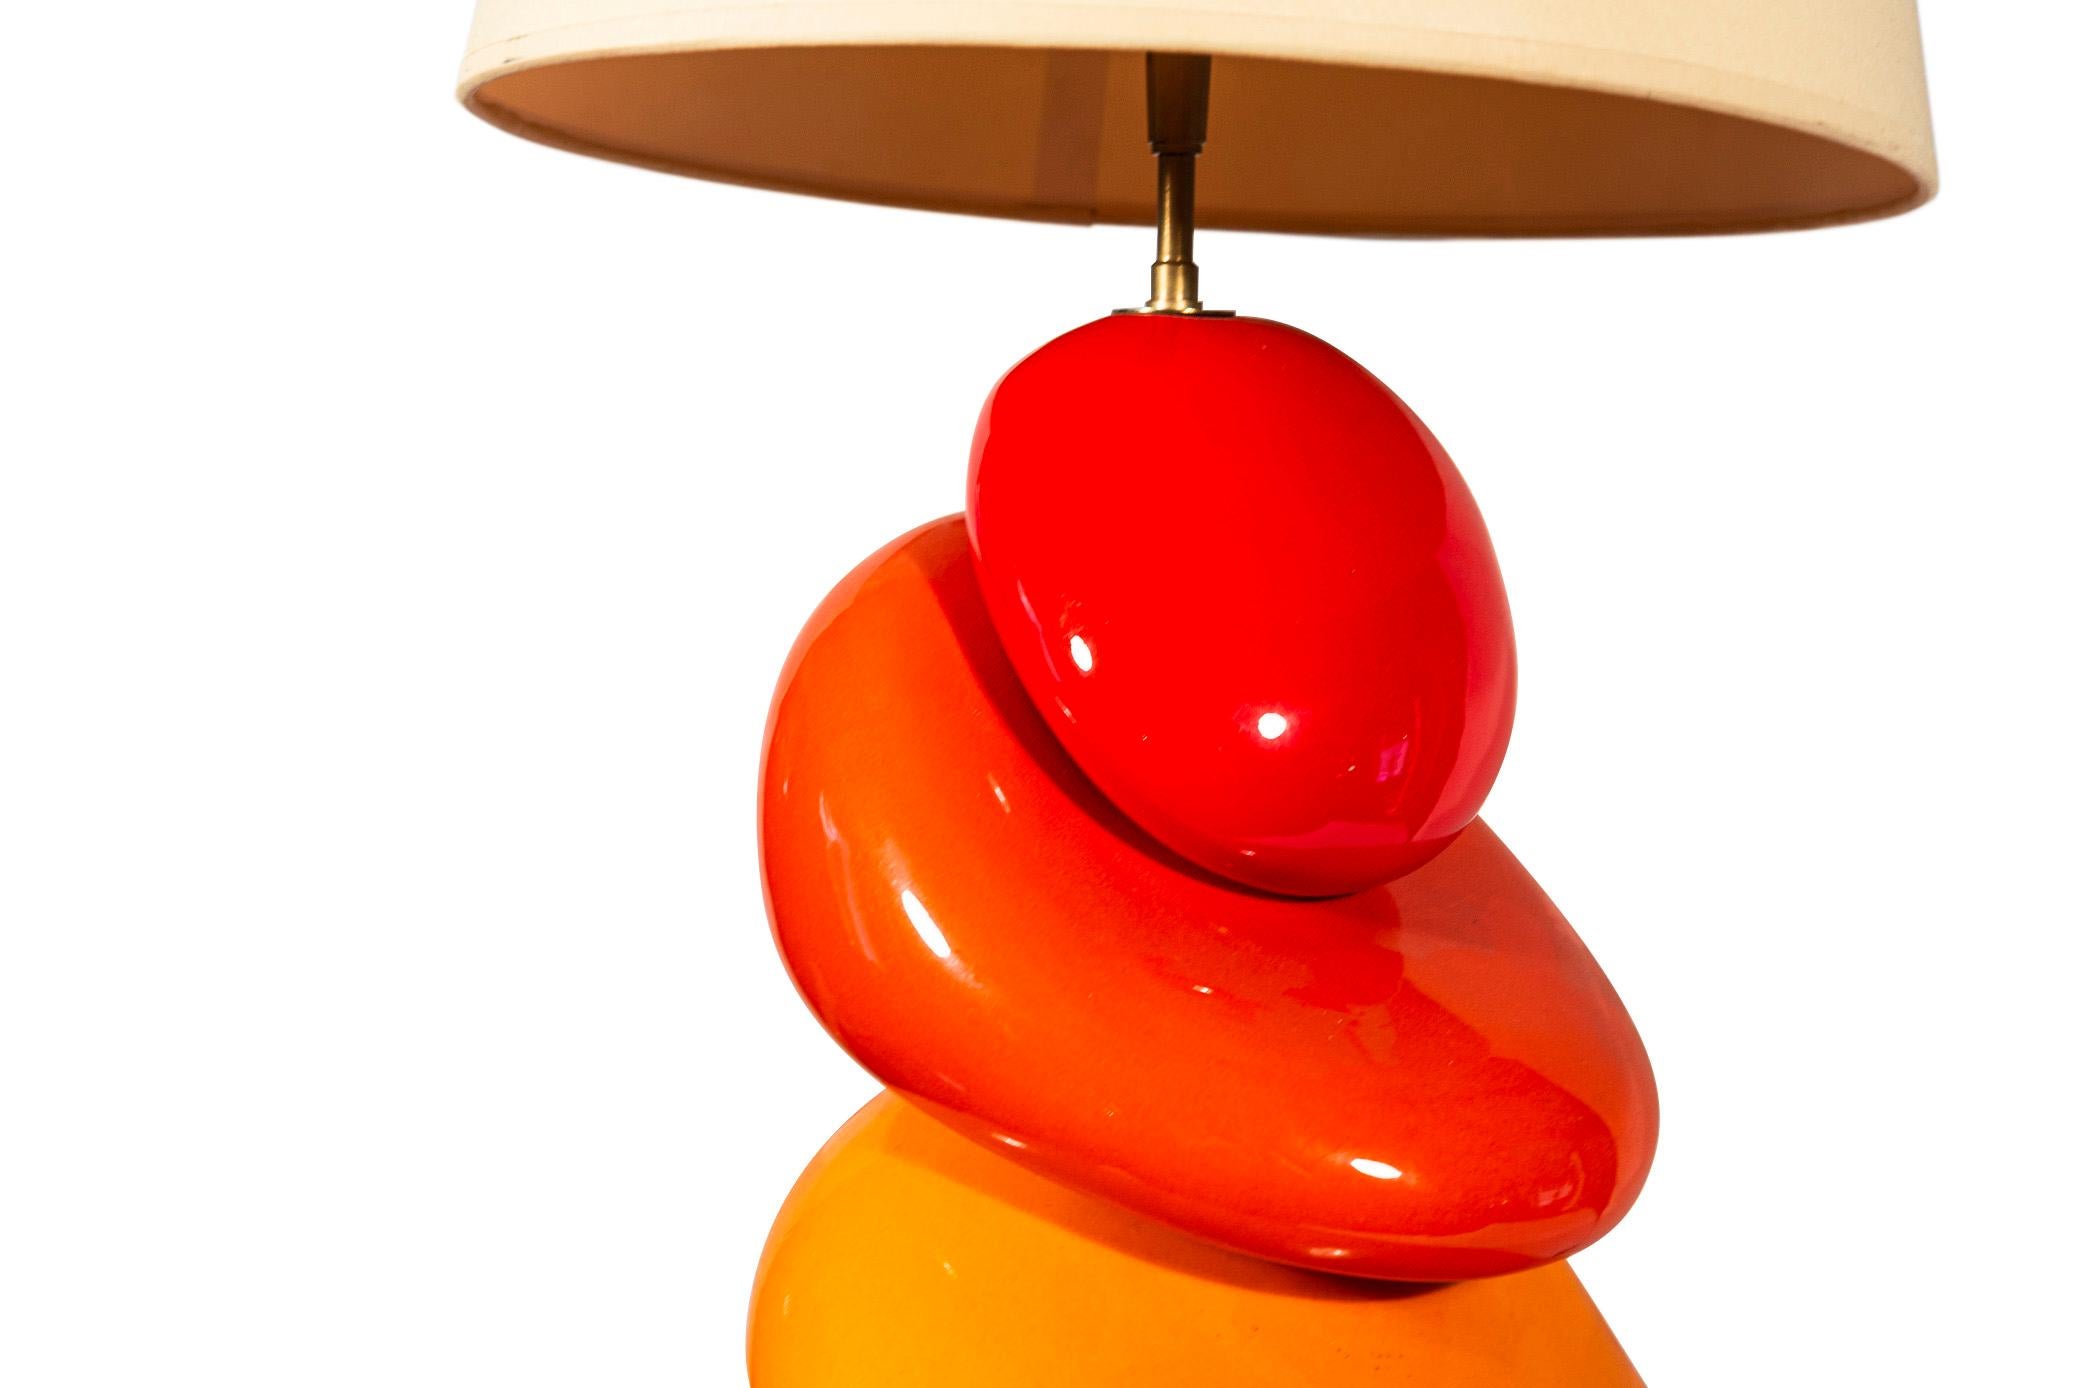 François Chatain,
Table lamp,
Painted ceramic,
Signed,
circa 1970, France.

Measures: Height 91 cm, depth 33 cm, width 27 cm.